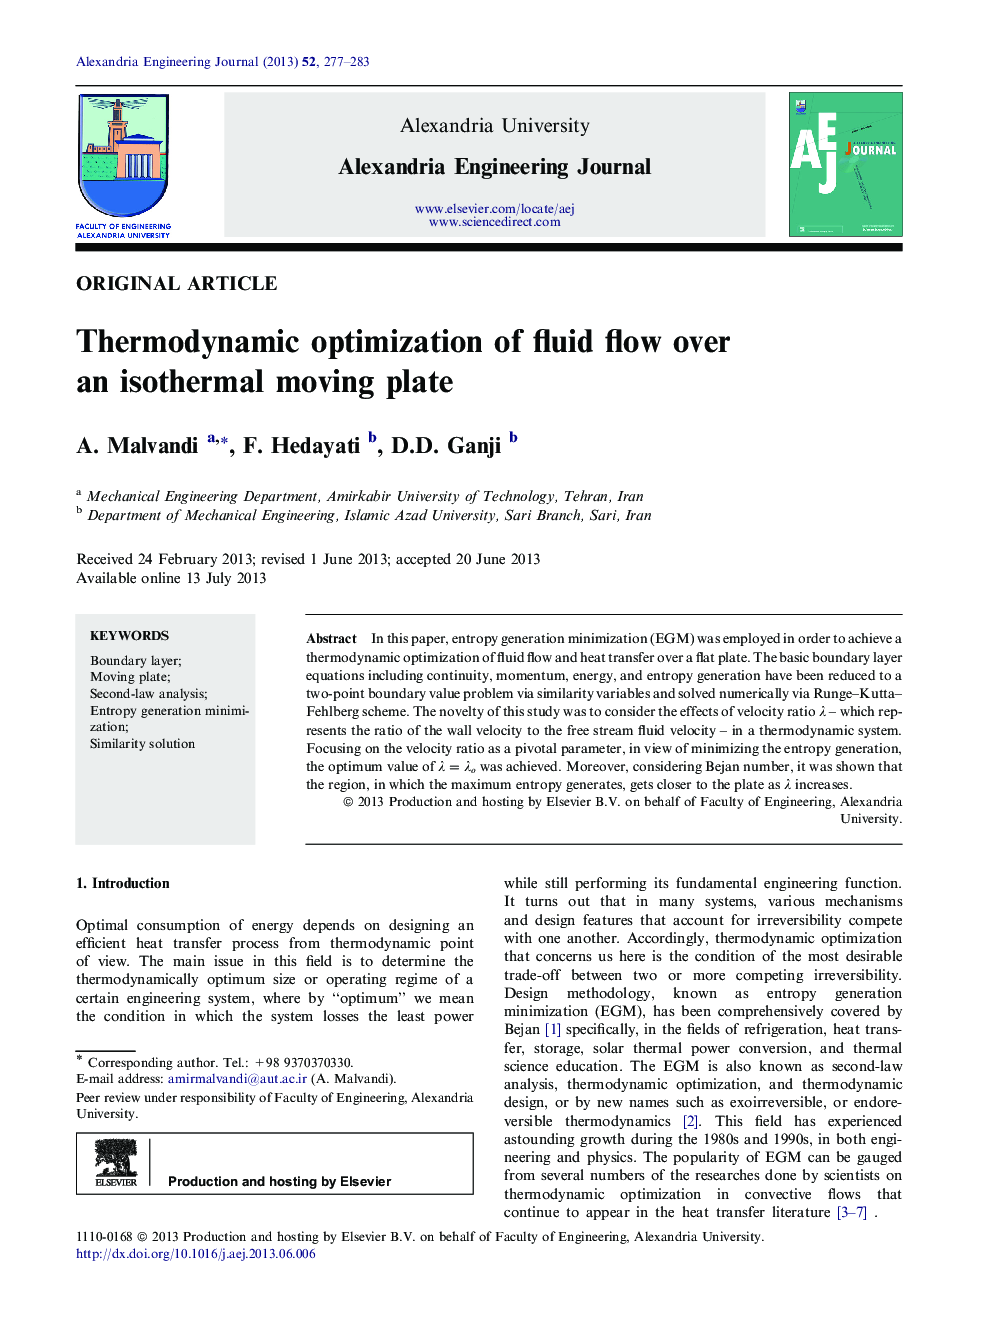 Thermodynamic optimization of fluid flow over an isothermal moving plate 